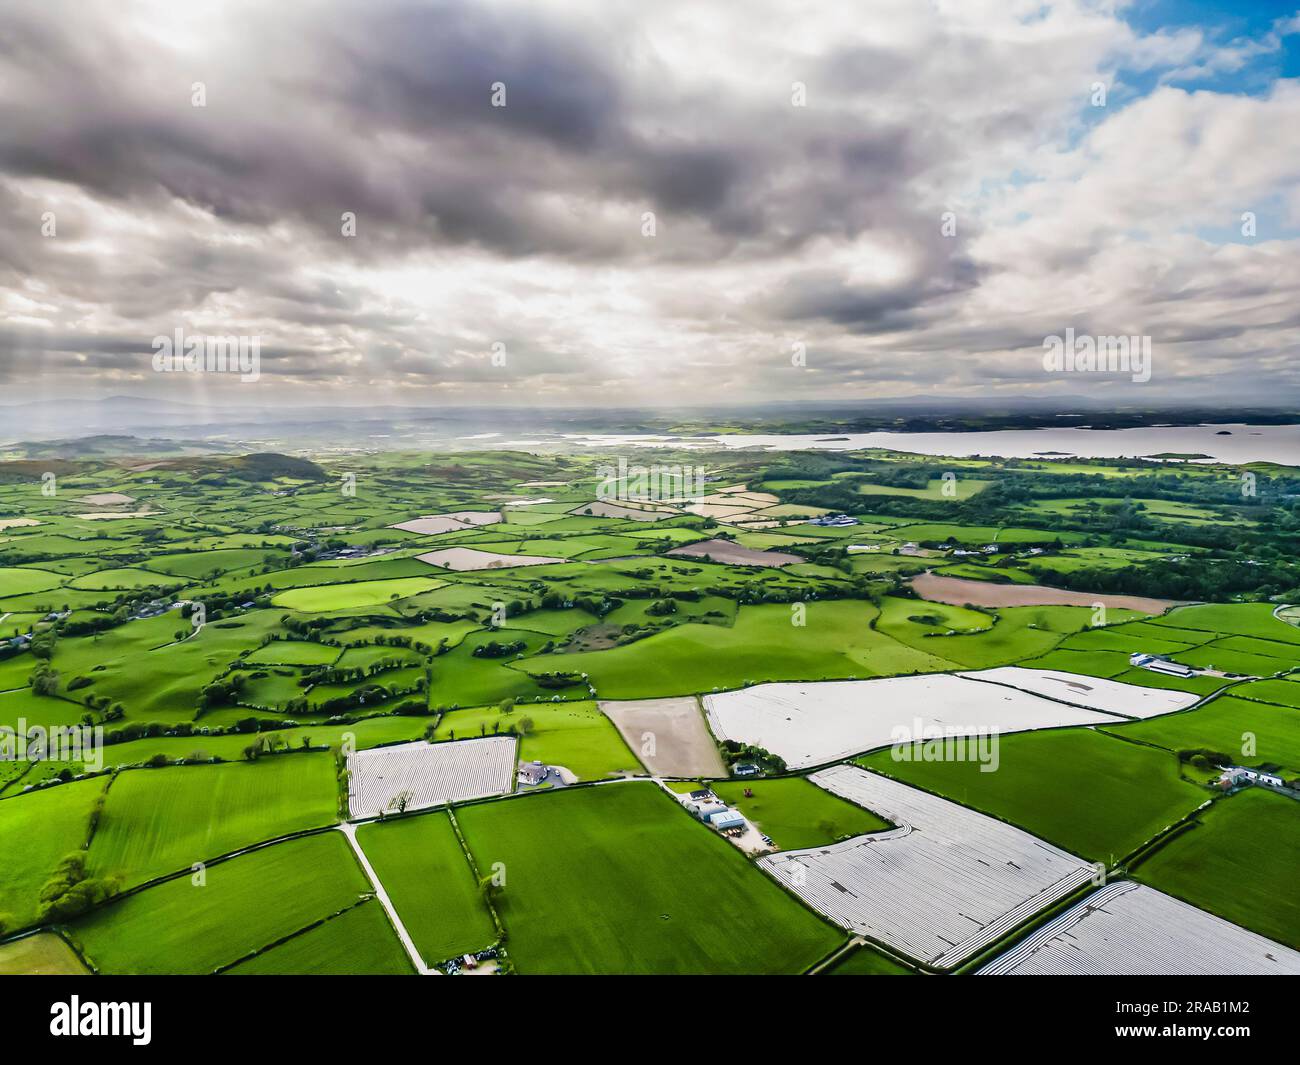 Aerial shot of countryside of south County Down, Northern Ireland, including fields covered in plastic sheeting to protect maize seedlings. Stock Photo